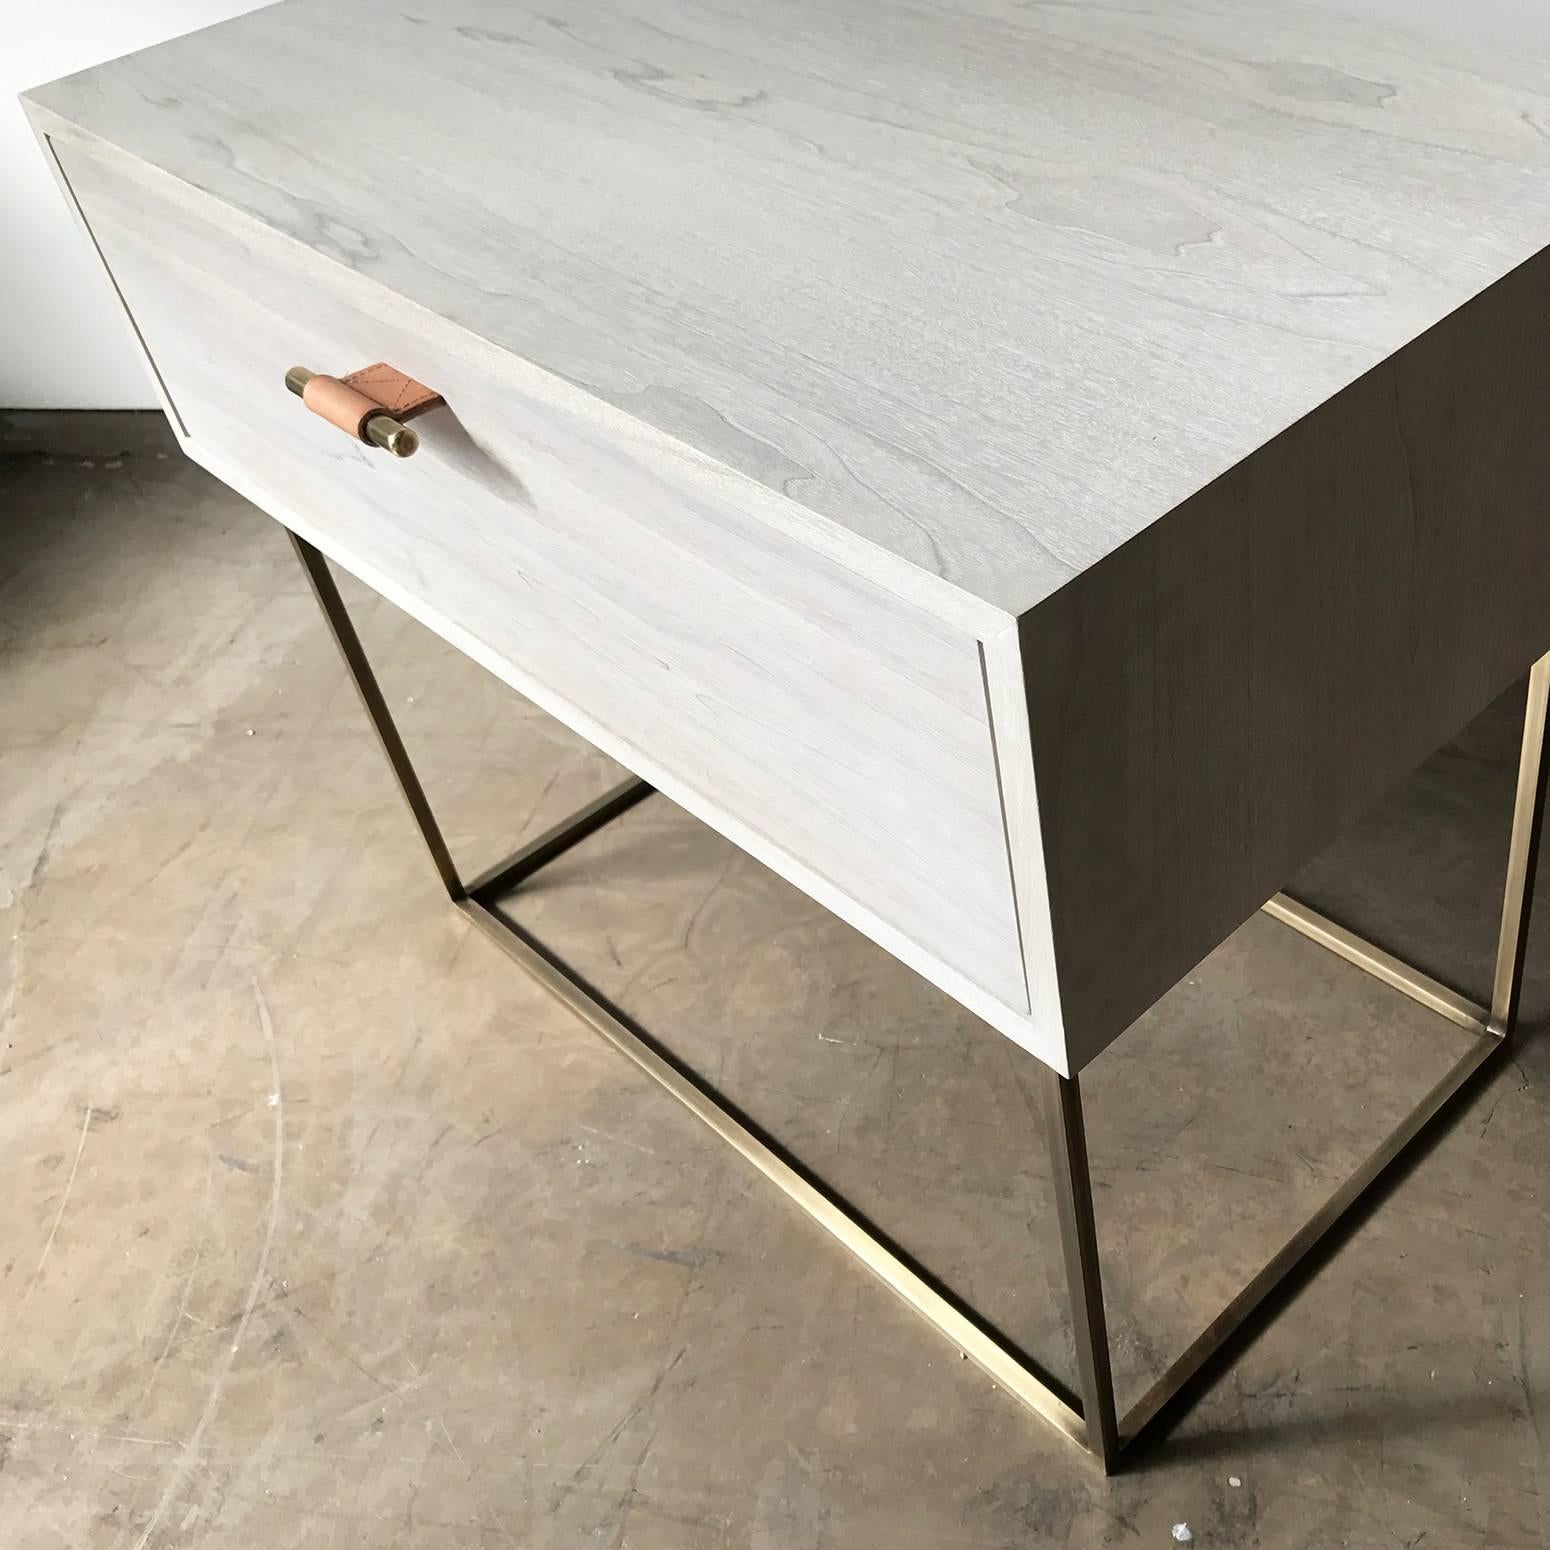 The Kerry side table by Thomas Hayes Studio features a custom wood case with a solid steel or brass base. The drawers are made with the highest quality soft-close mechanisms that open with our leather wrapped brass pulls. The Kerry is available in a